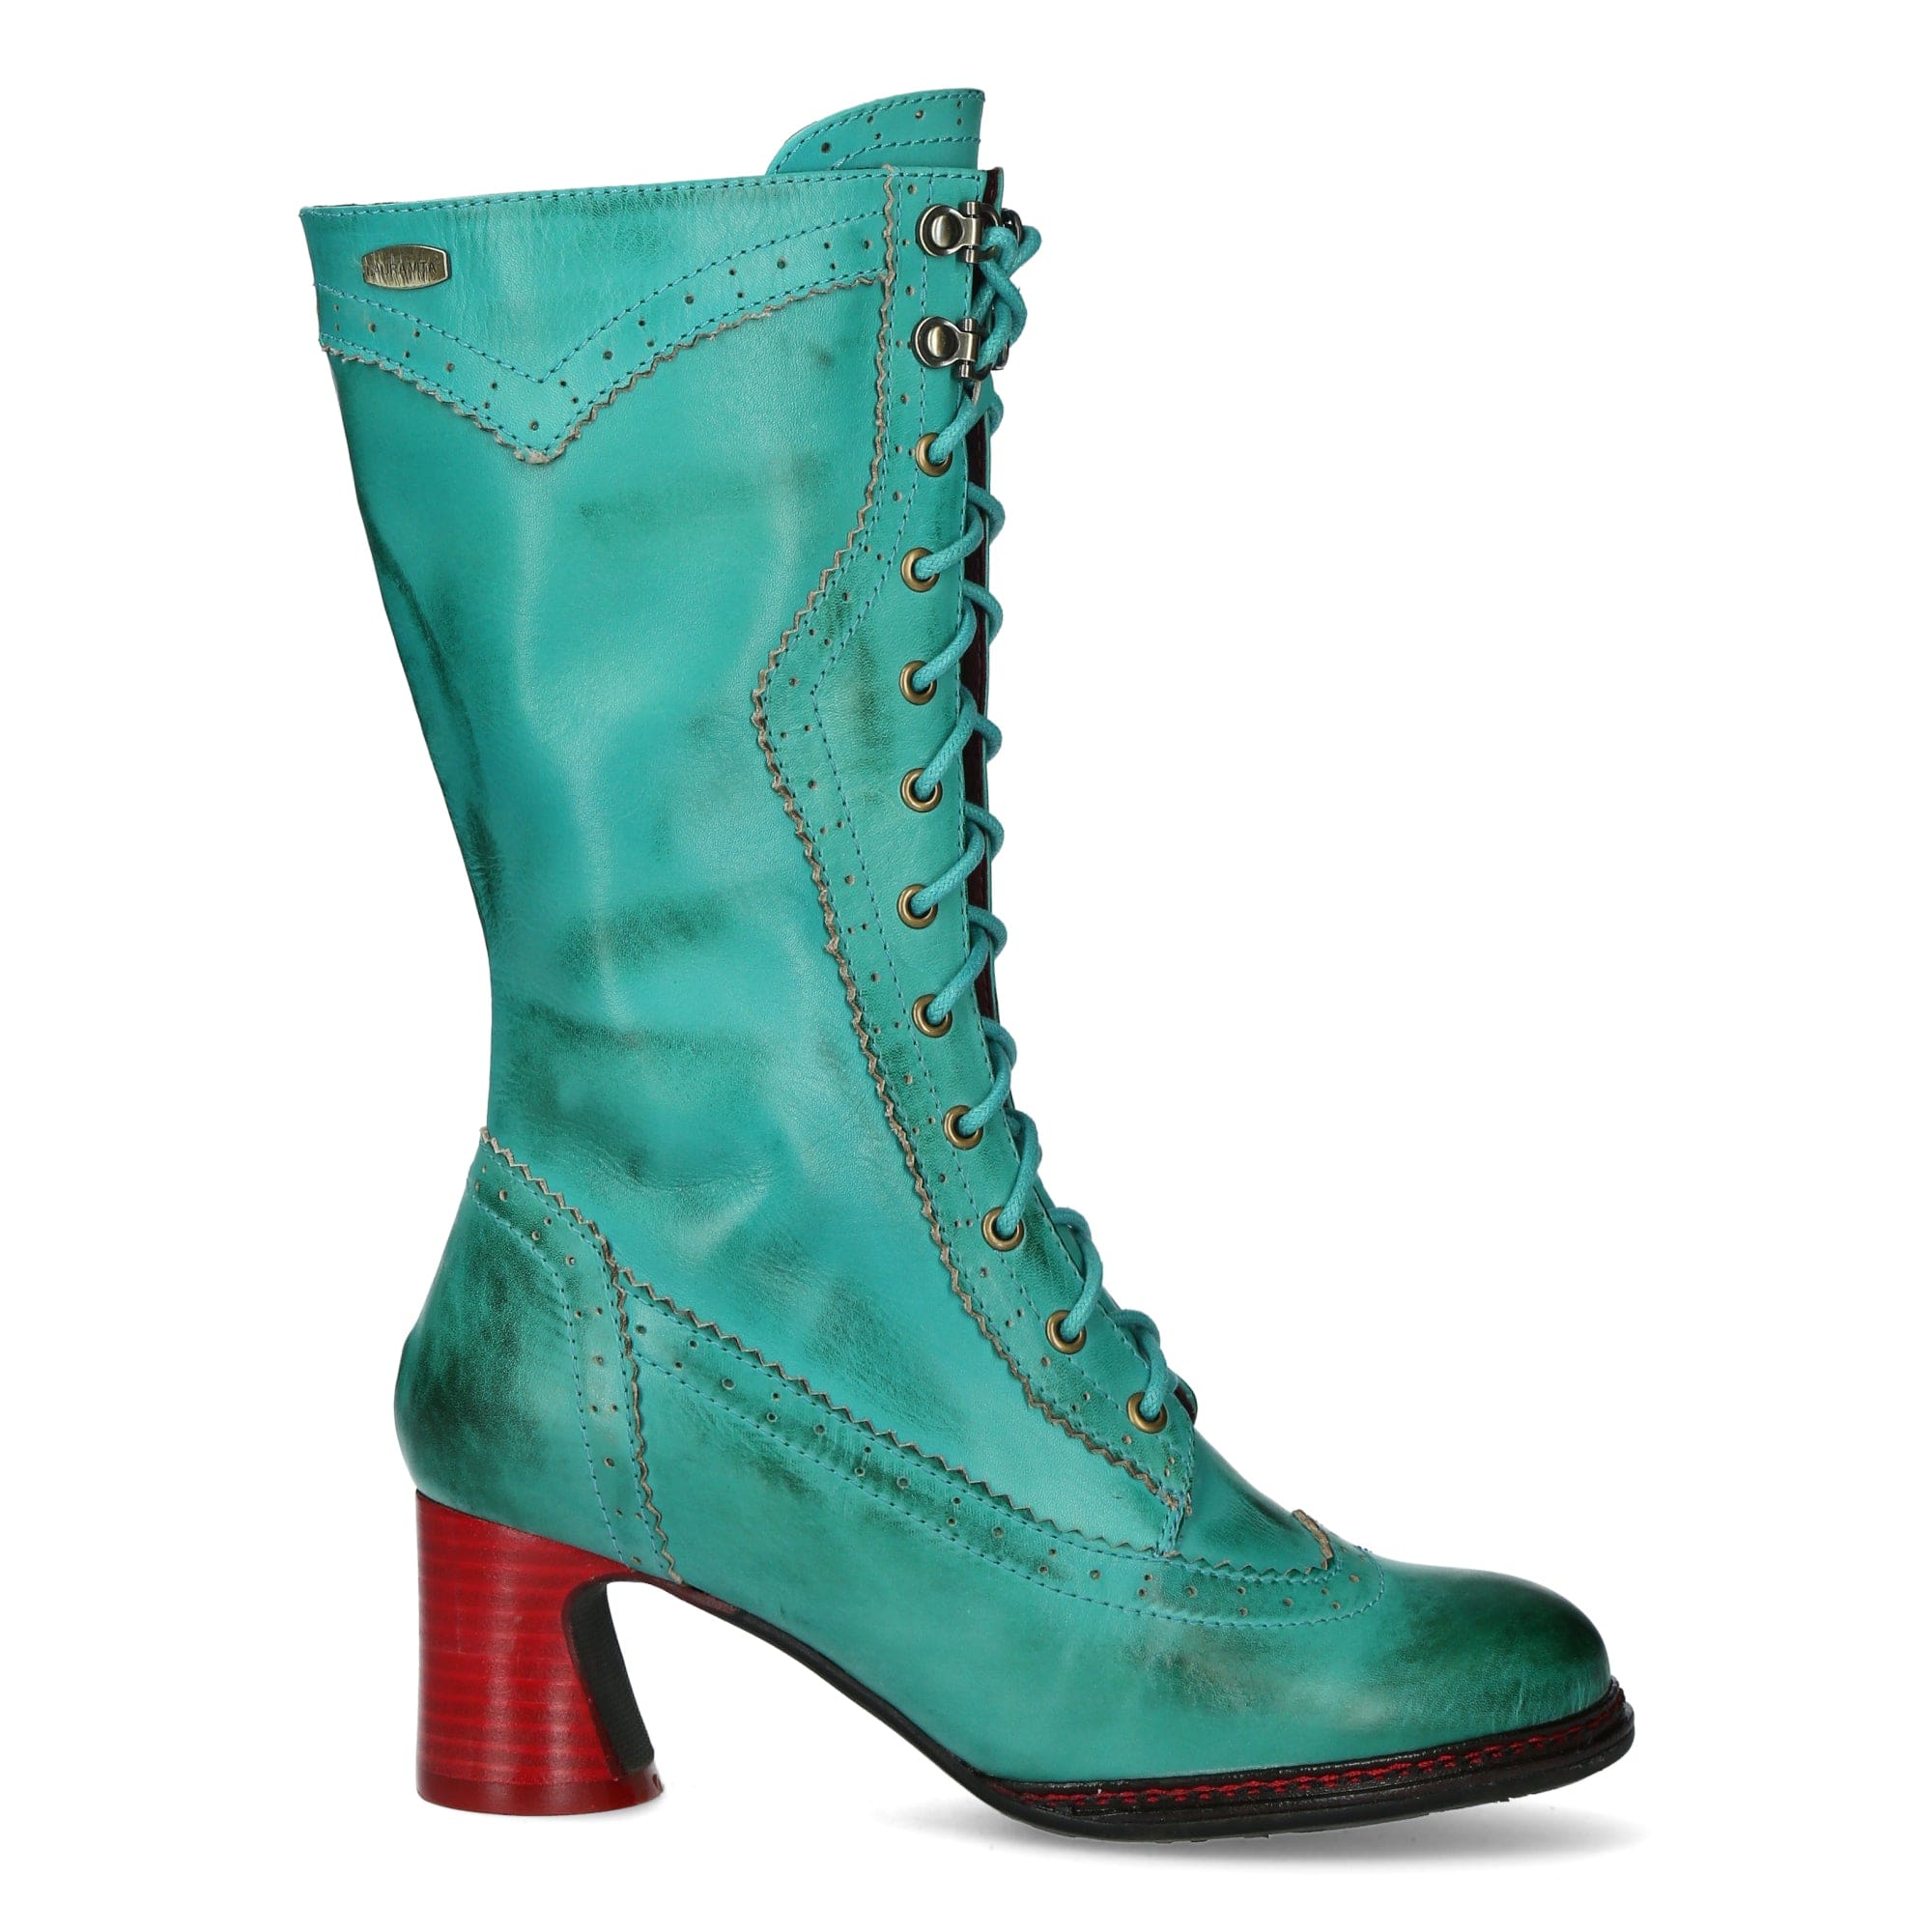 Chaussure INCAO 06A - 36 / Turquoise - Botte